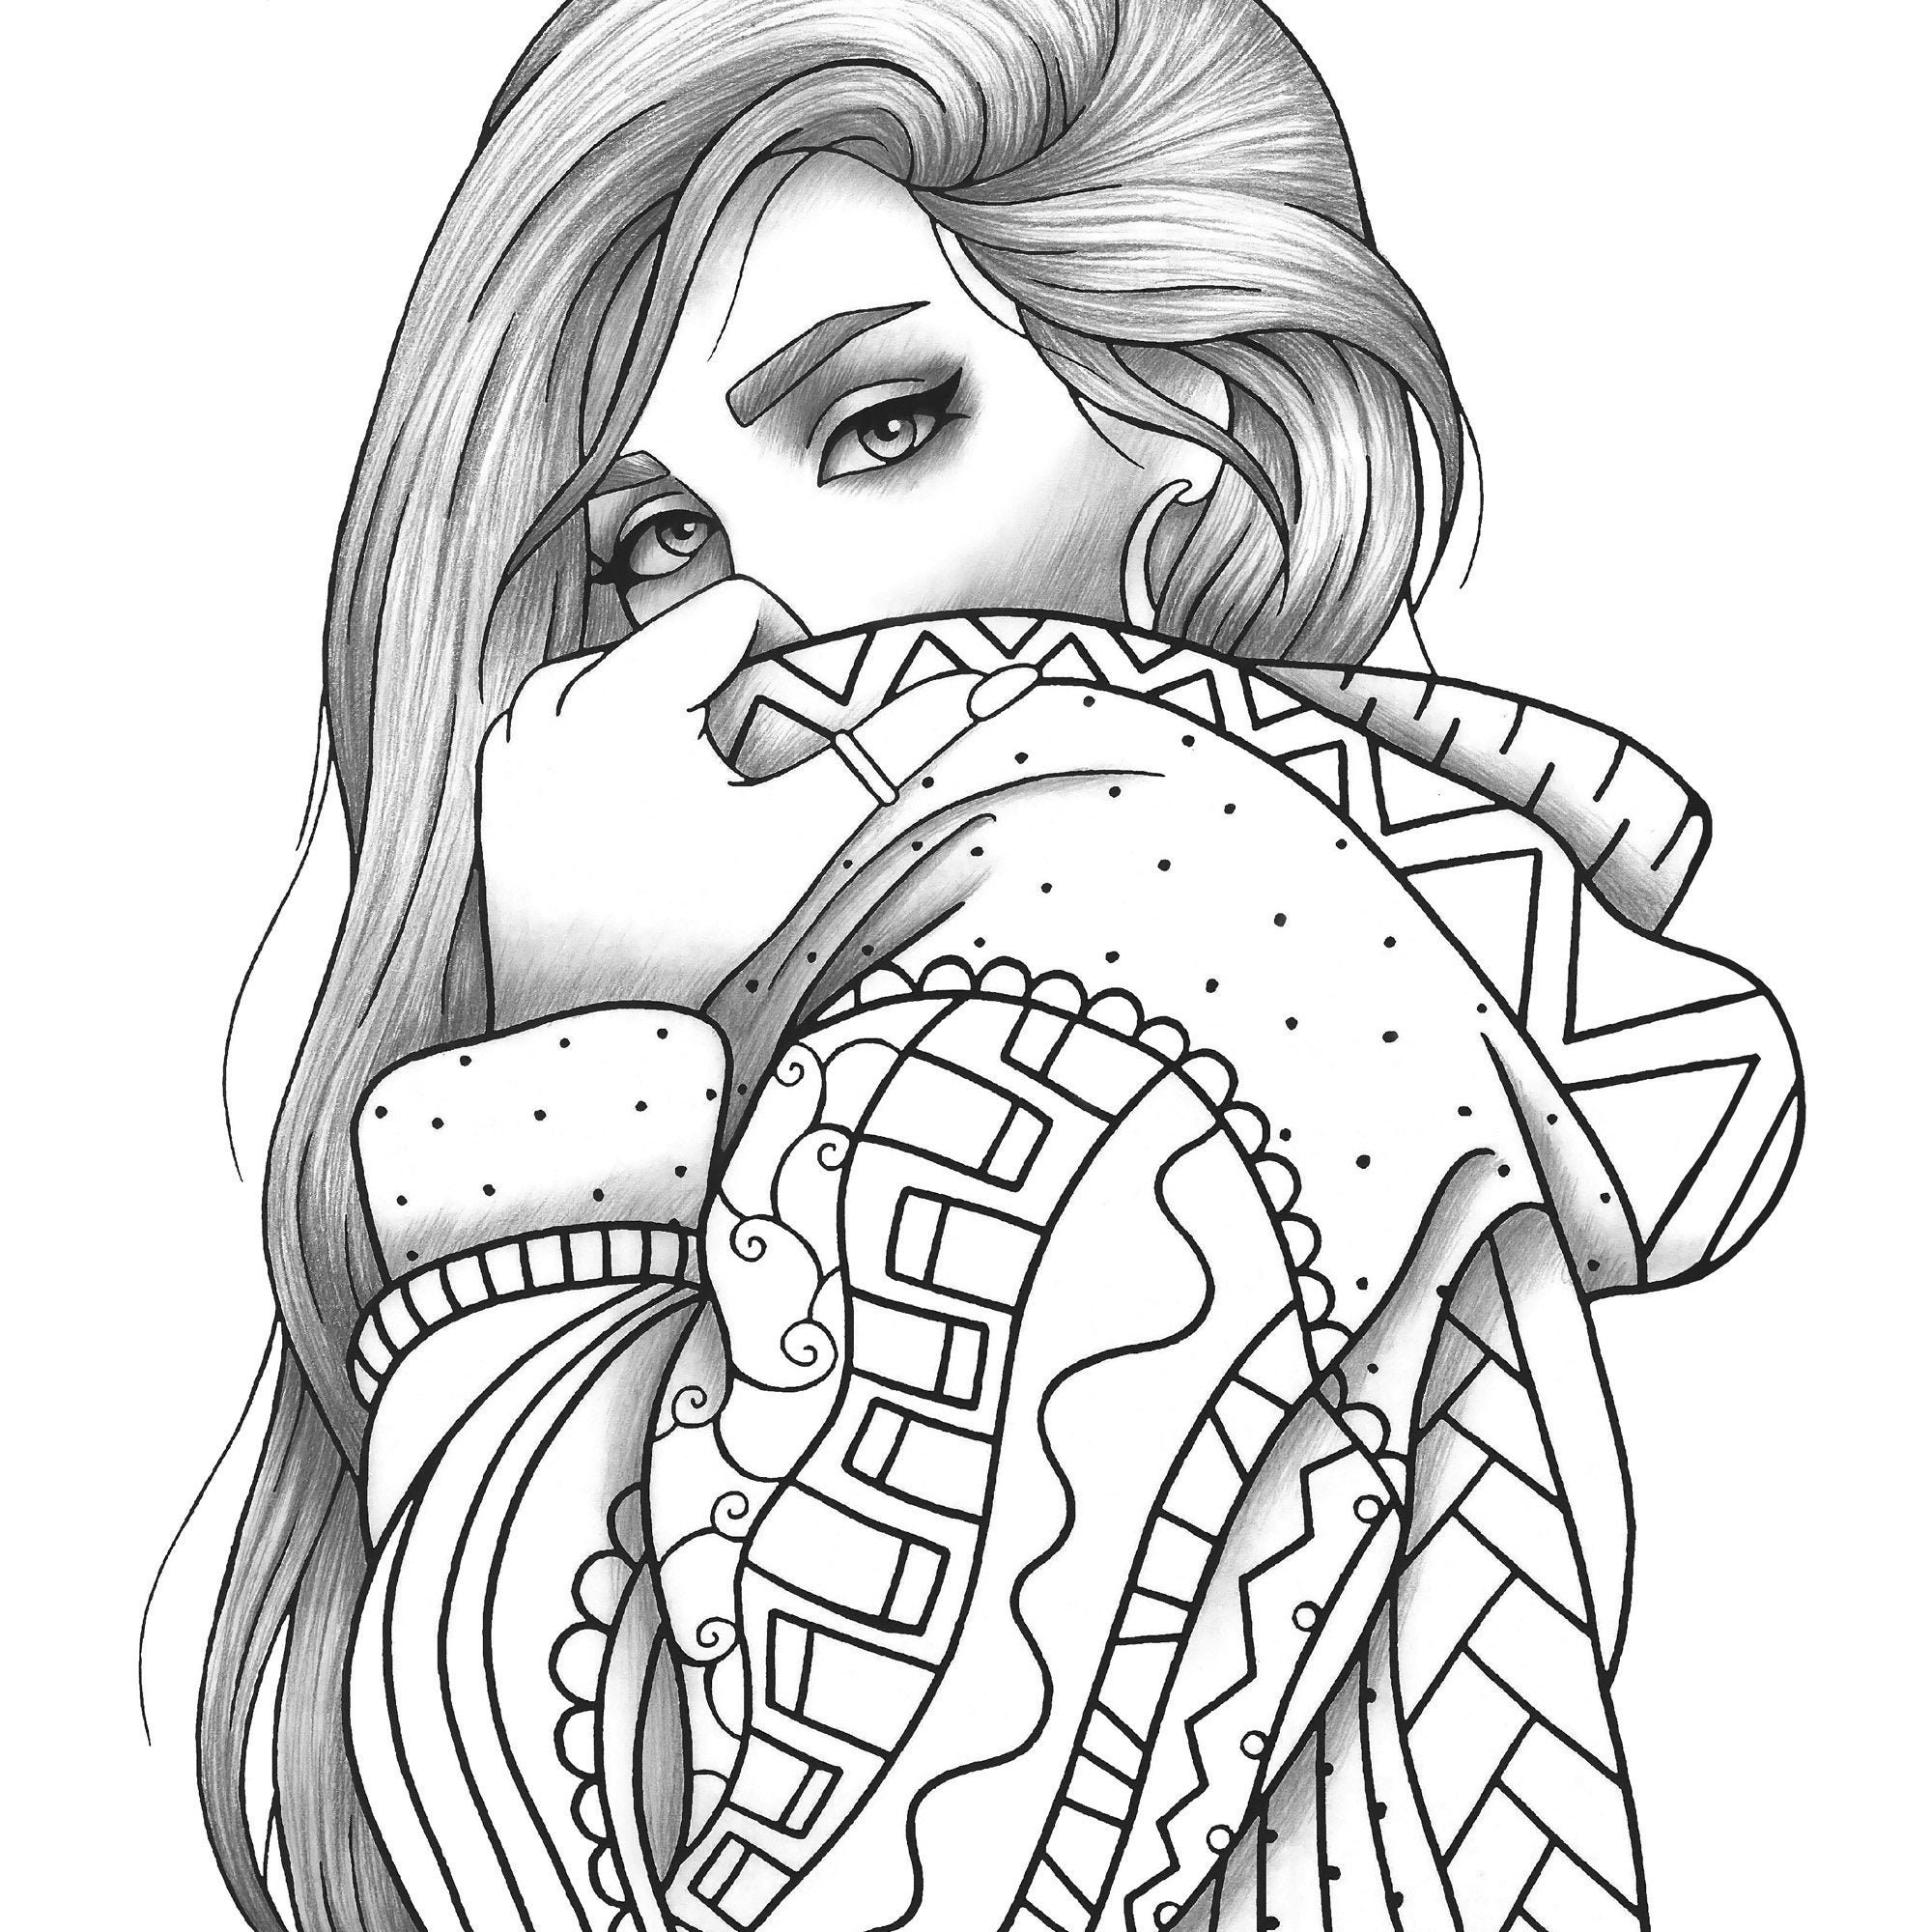 Adult Coloring Page Girl Portrait and Clothes Colouring Sheet   Etsy ...